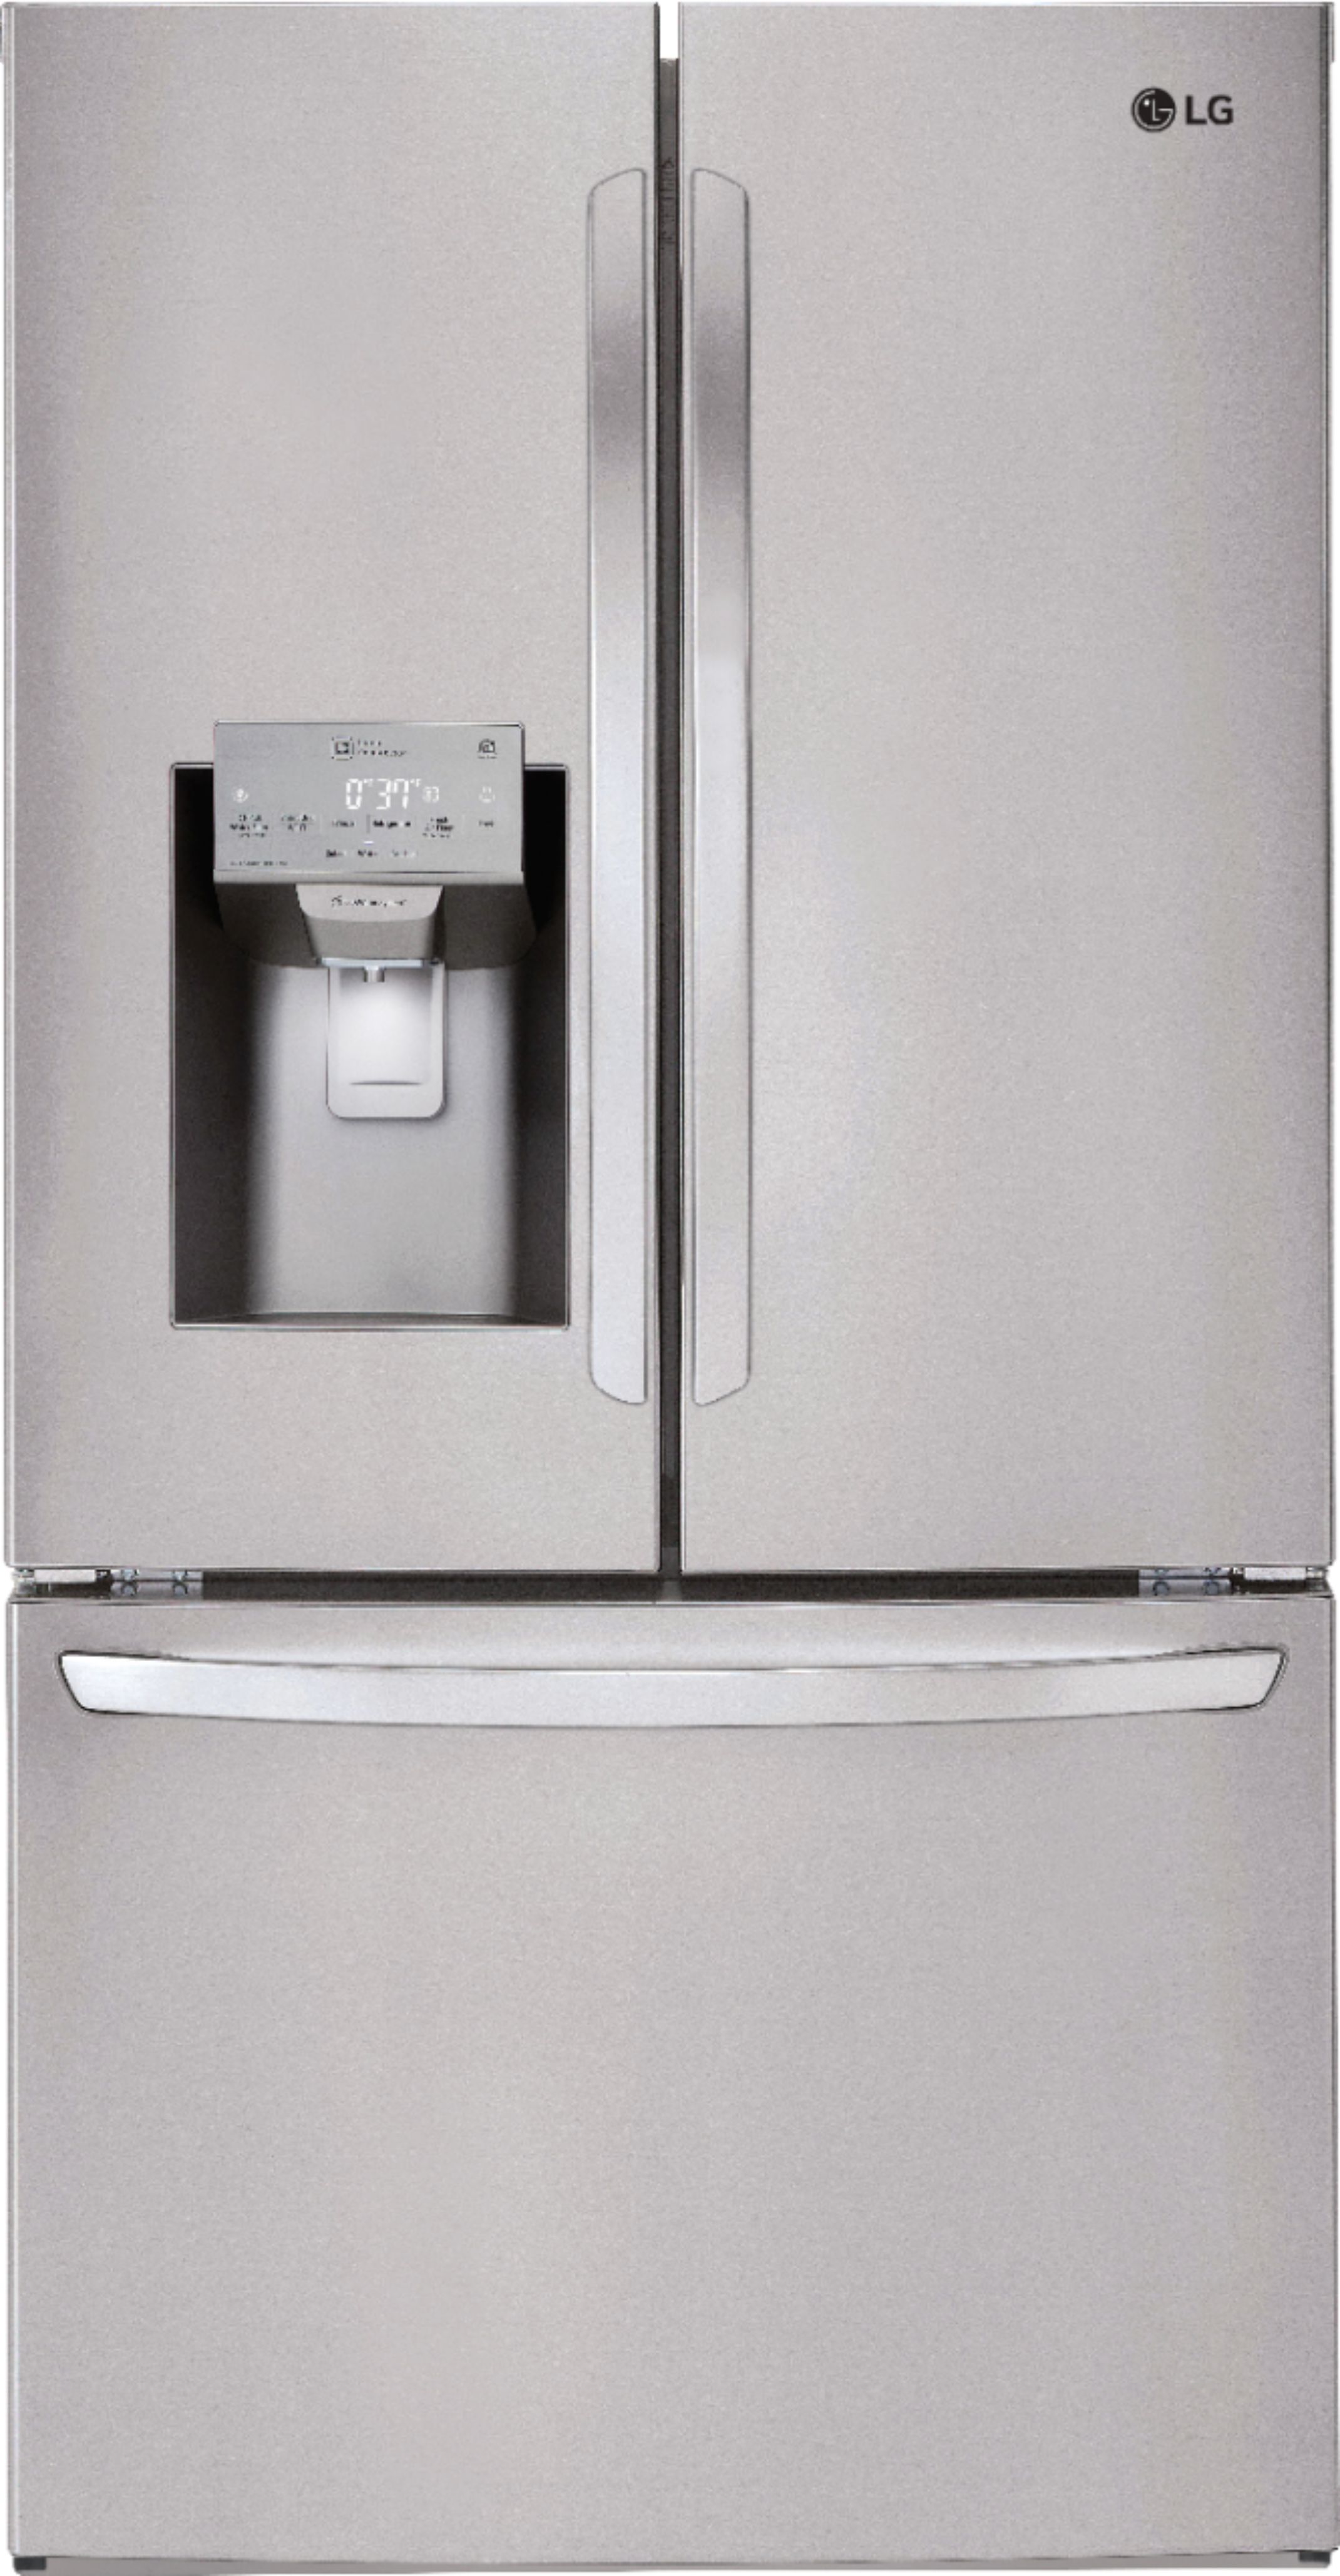 Customer Reviews LG 27.9 Cu. Ft. French Door Smart Refrigerator with